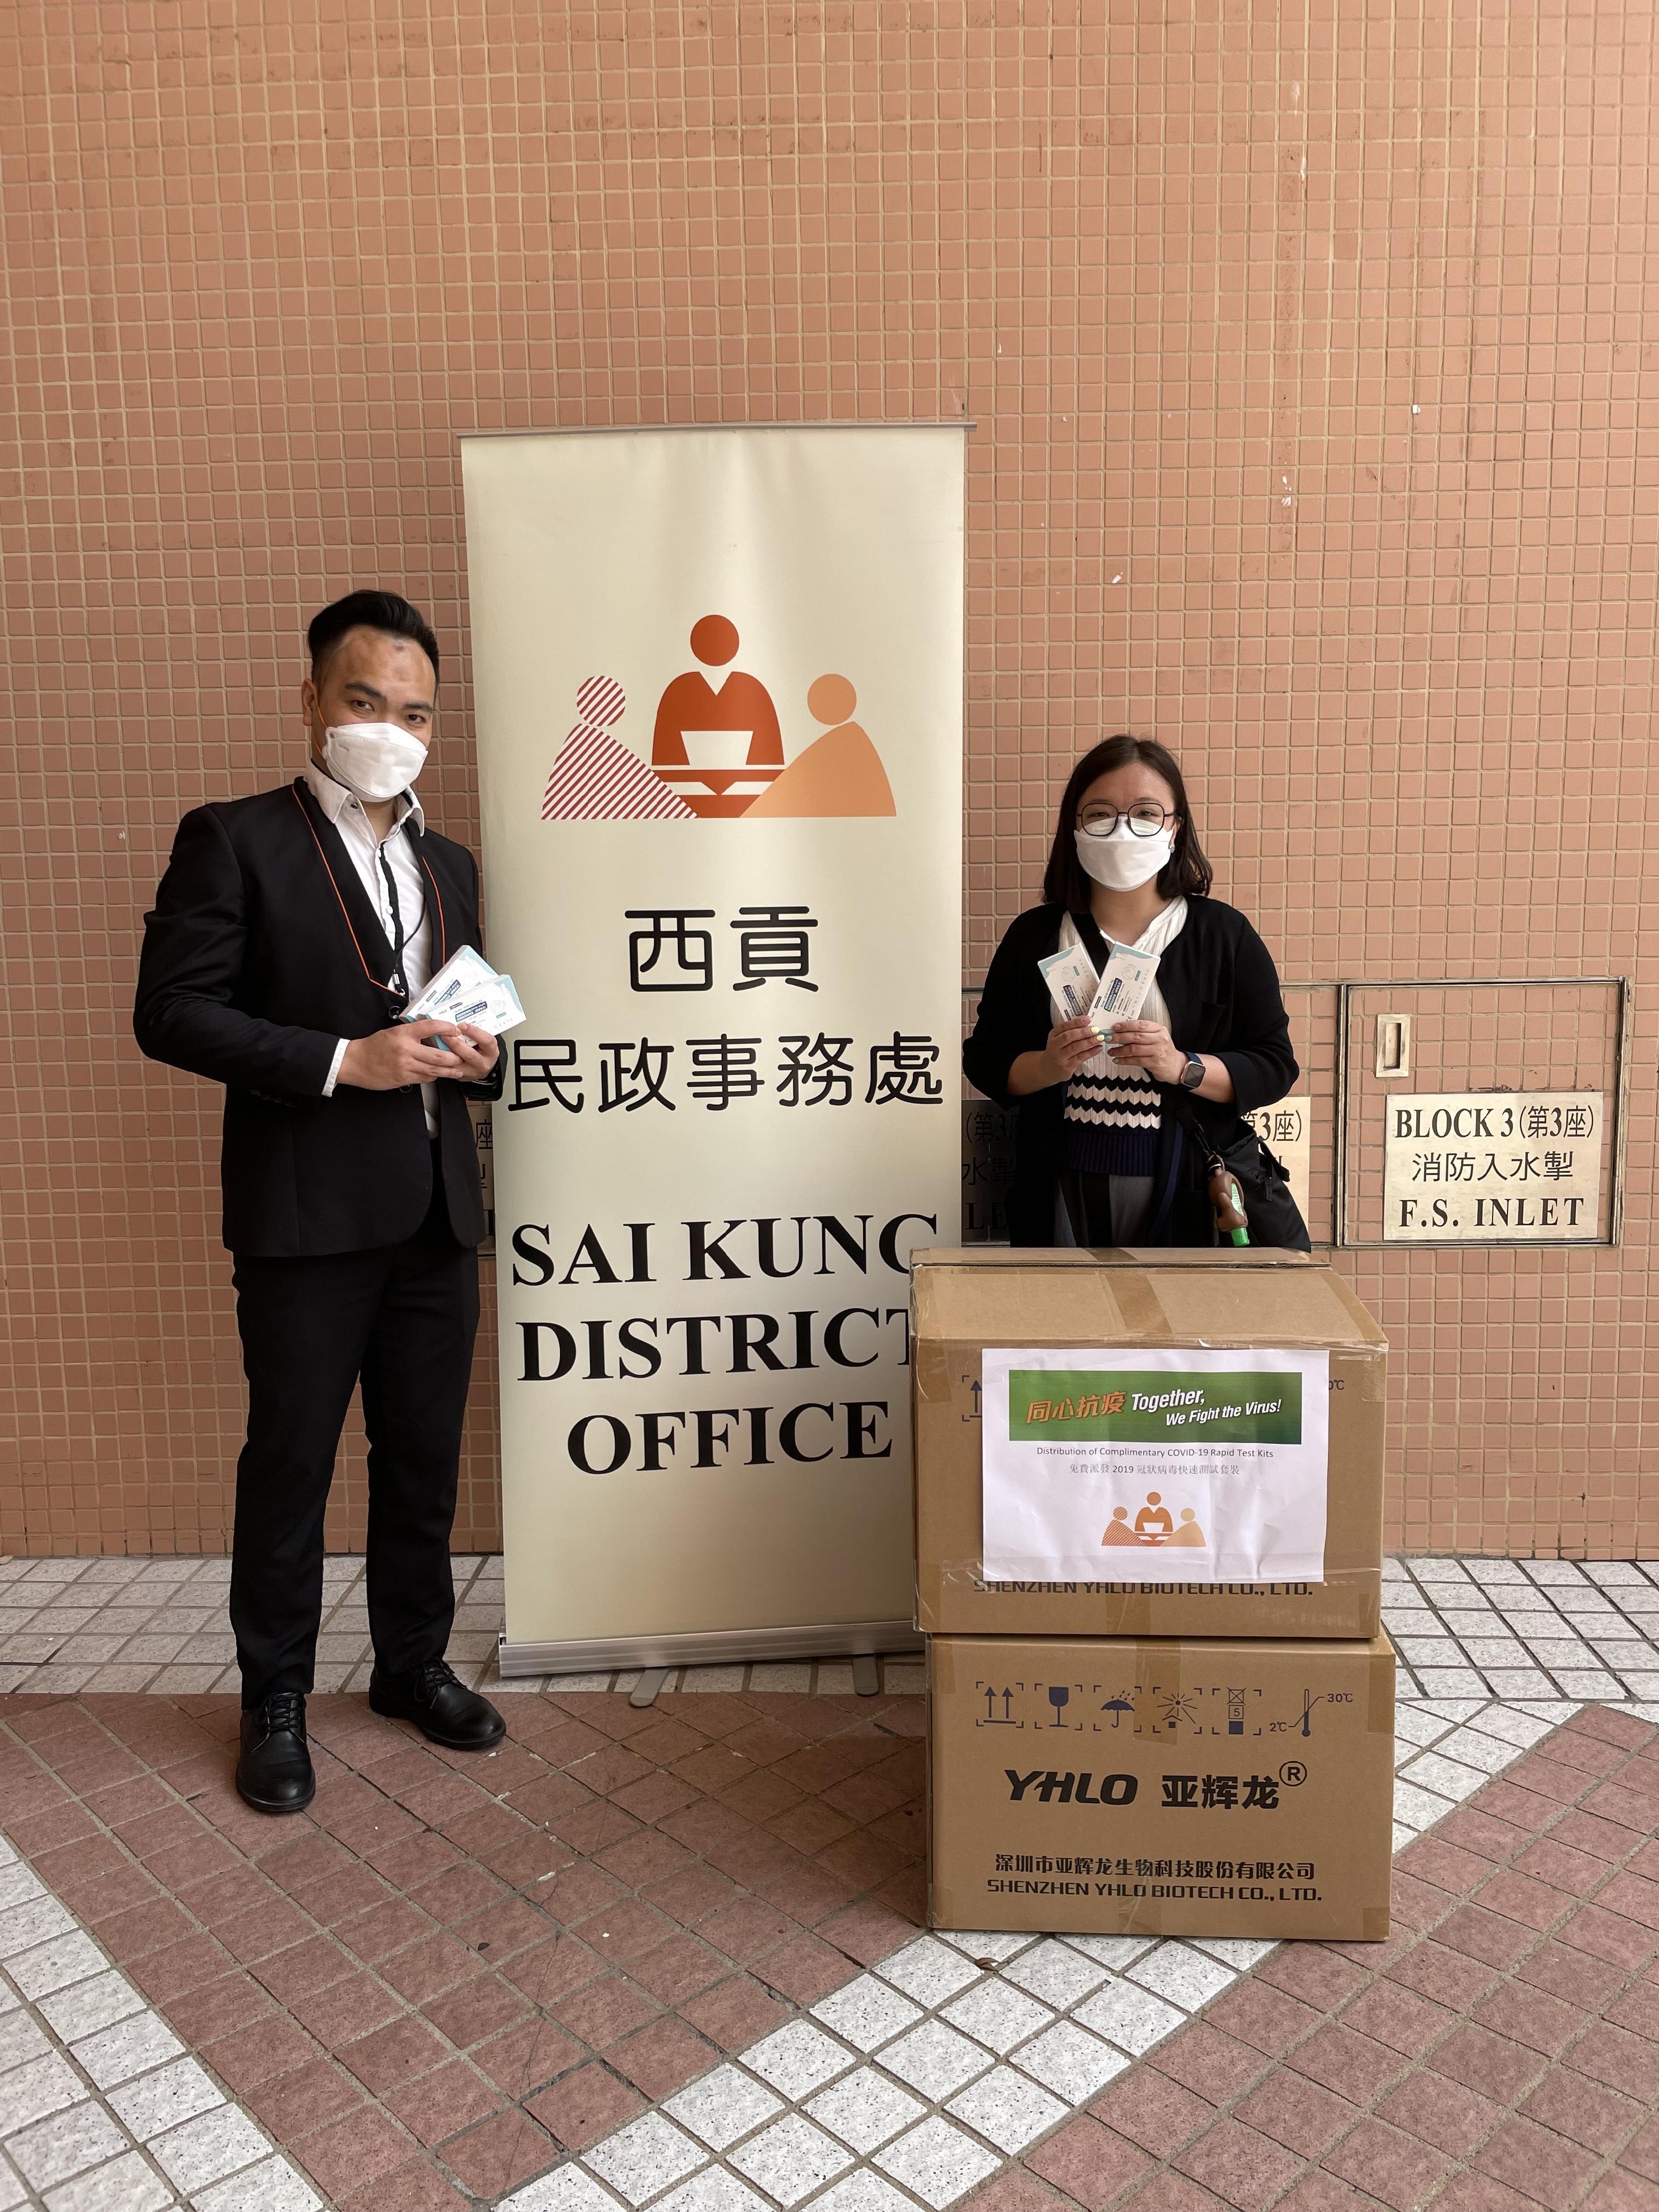 The Sai Kung District Office today (May 3) distributed COVID-19 rapid test kits to households, cleansing workers and property management staff living and working in Well On Garden for voluntary testing through the property management company.